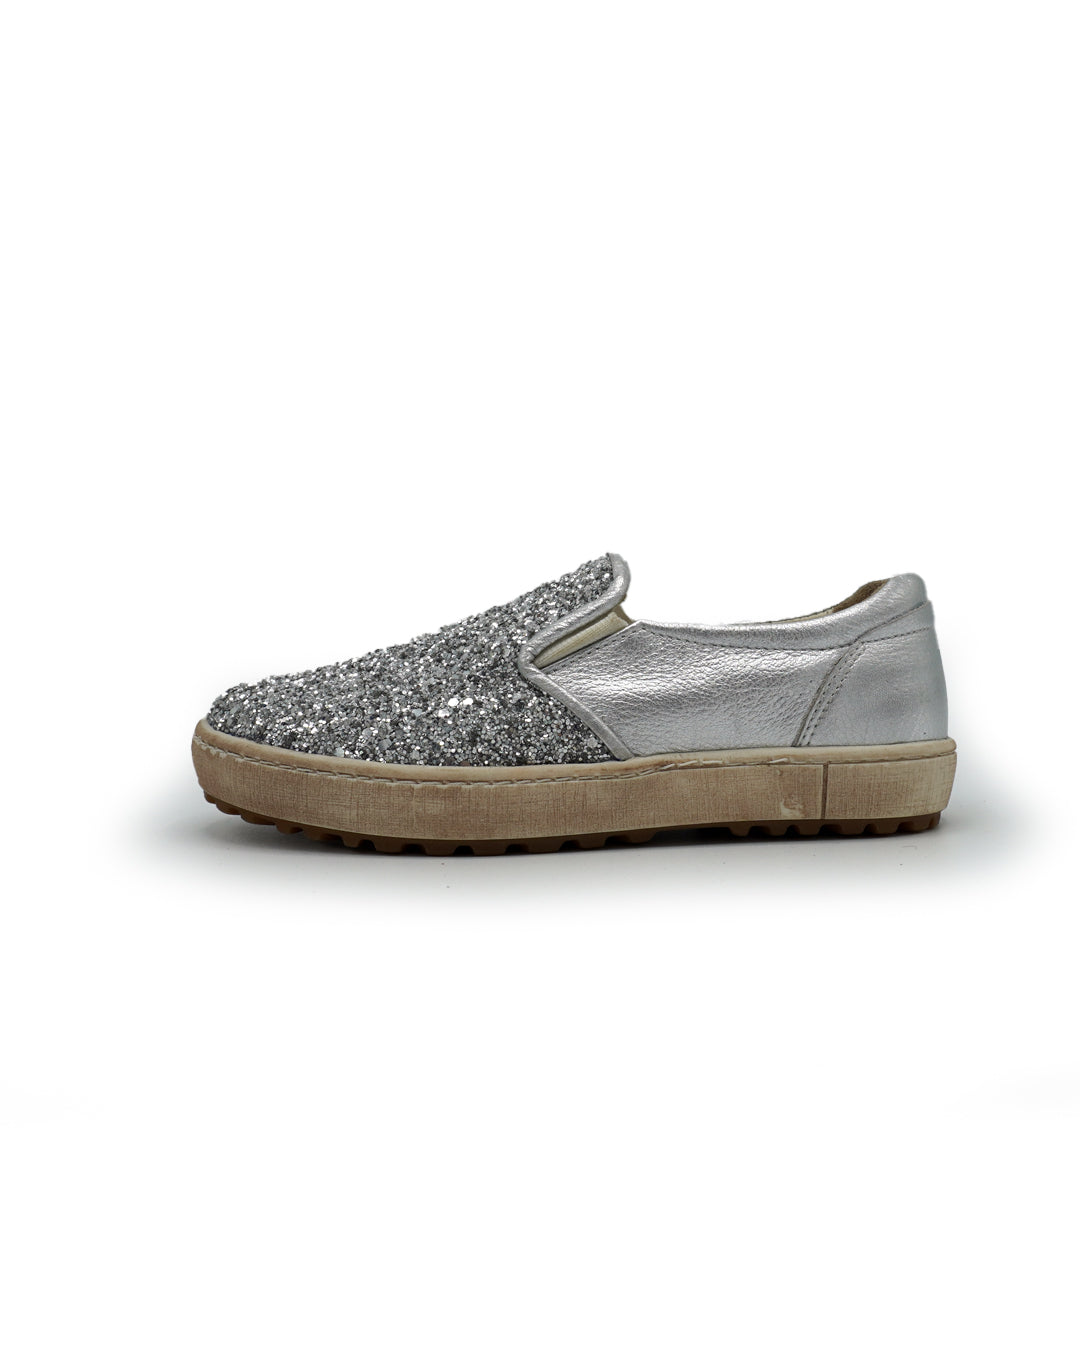 Sparkly Slip-on Leather Loafers for Kids